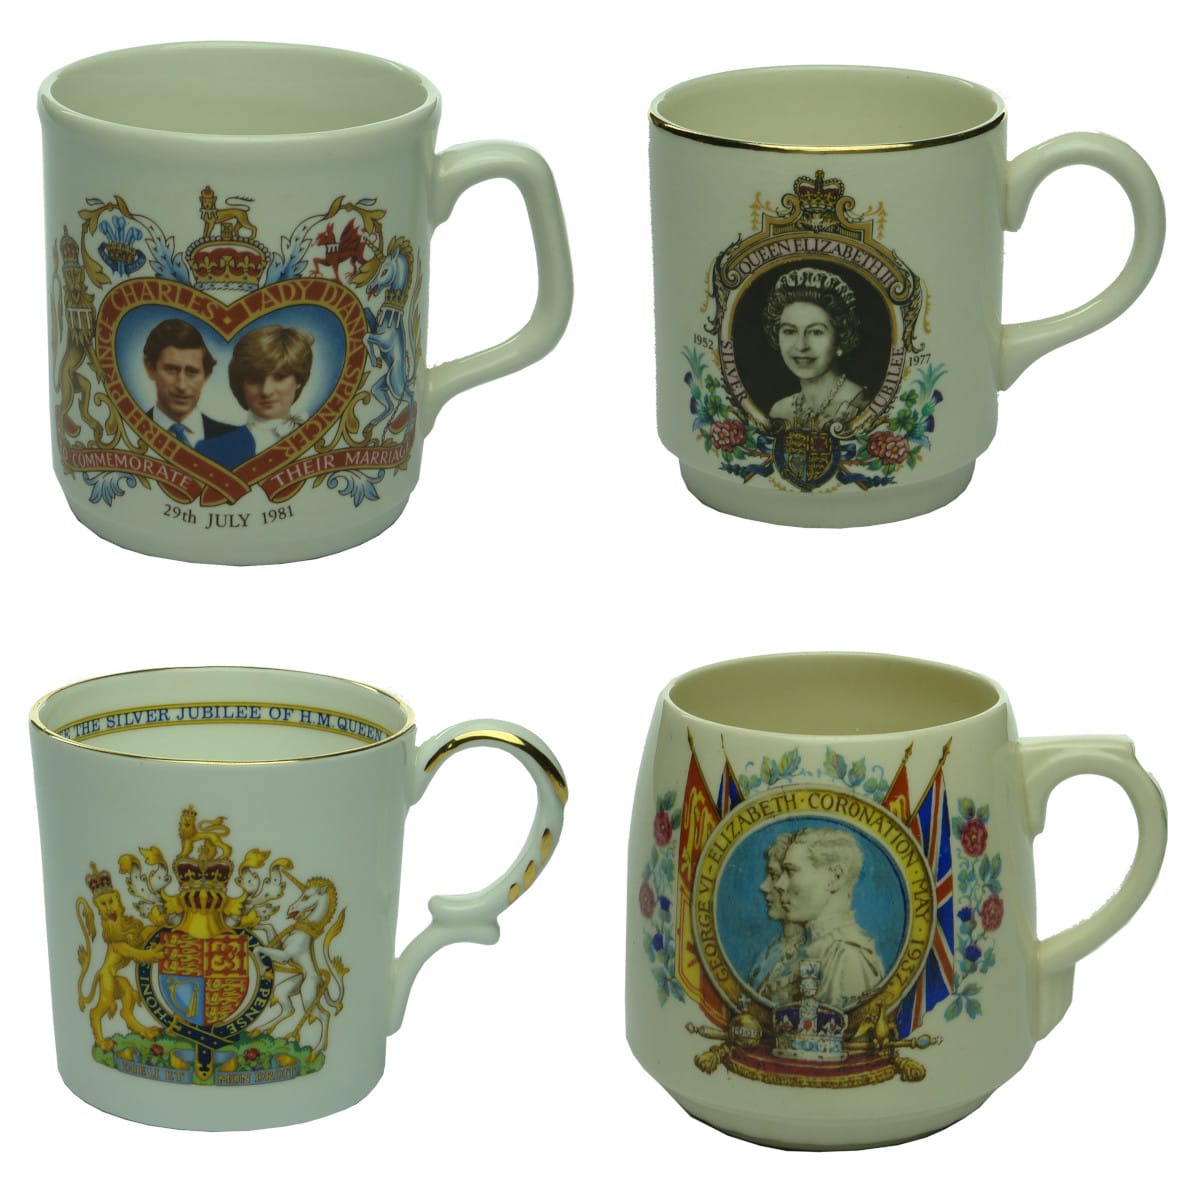 4 Pieces of Coronation Ware. Prince Charles and Lady Diana Spencer Wedding; Queen Elizabeth II Silver Jubilee x 2; George VI Coronation.